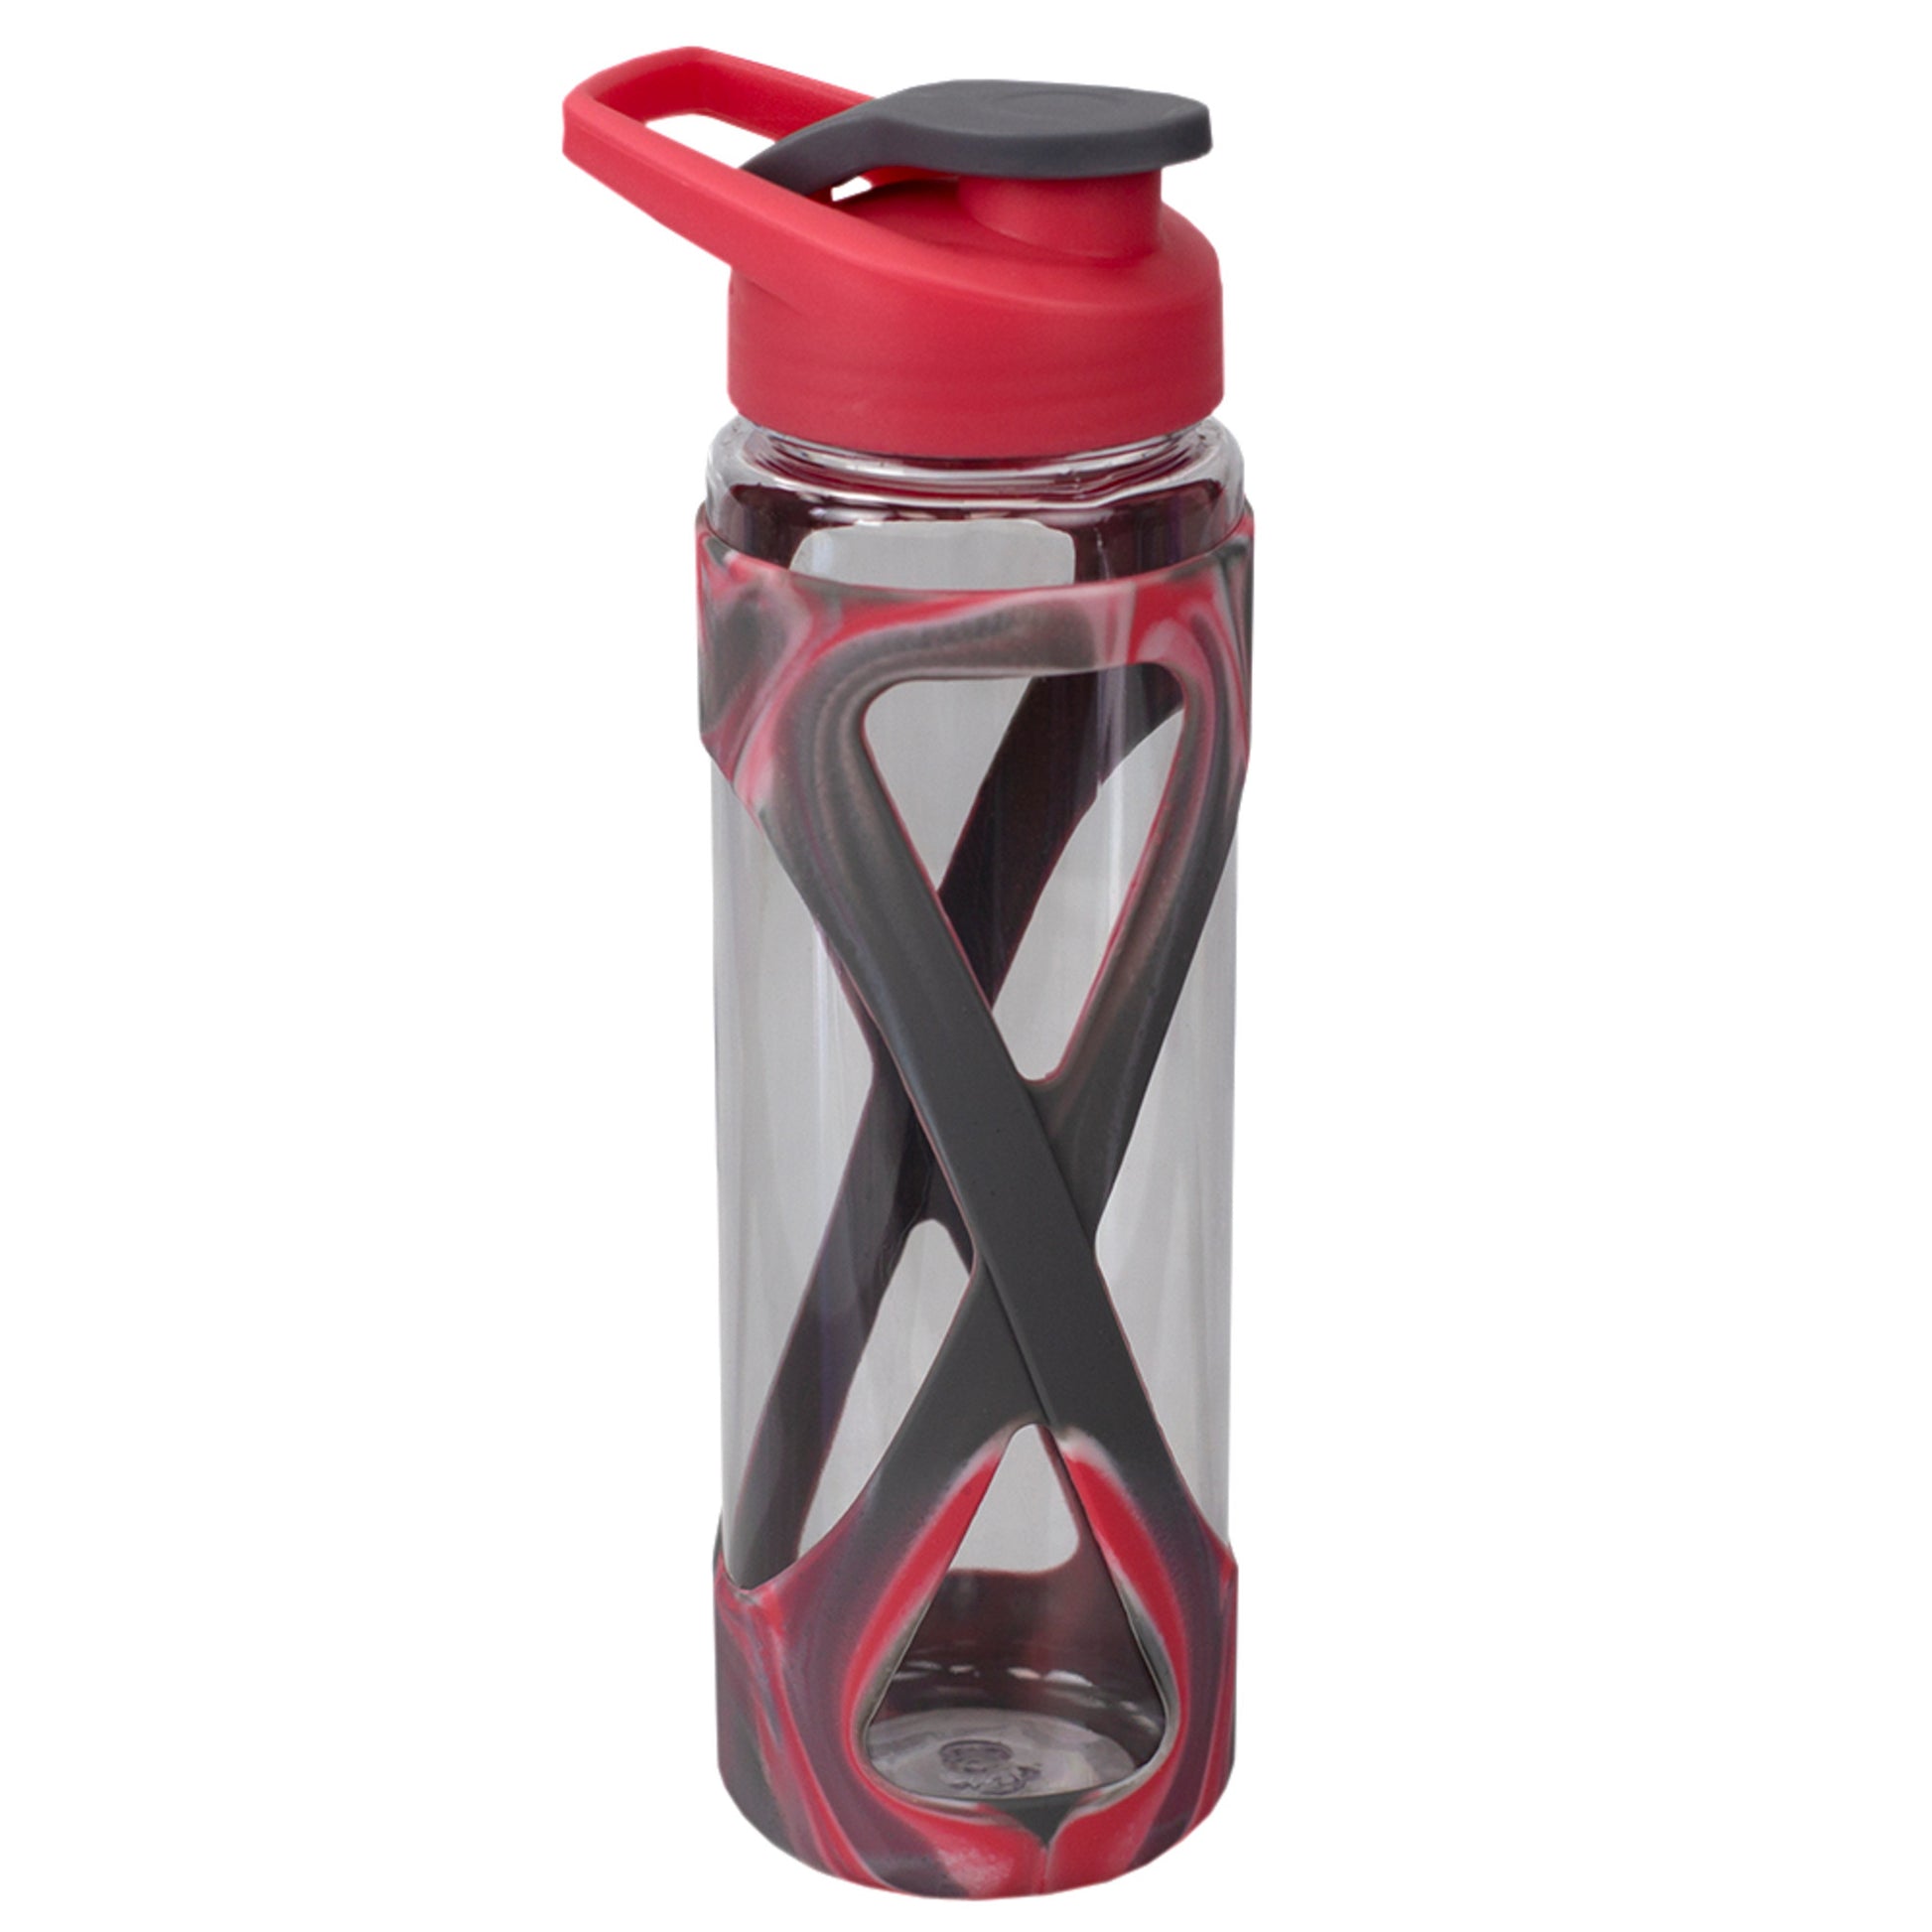 Home Basics 17 oz. Silicone Sleeve Water Bottle, Red - Red